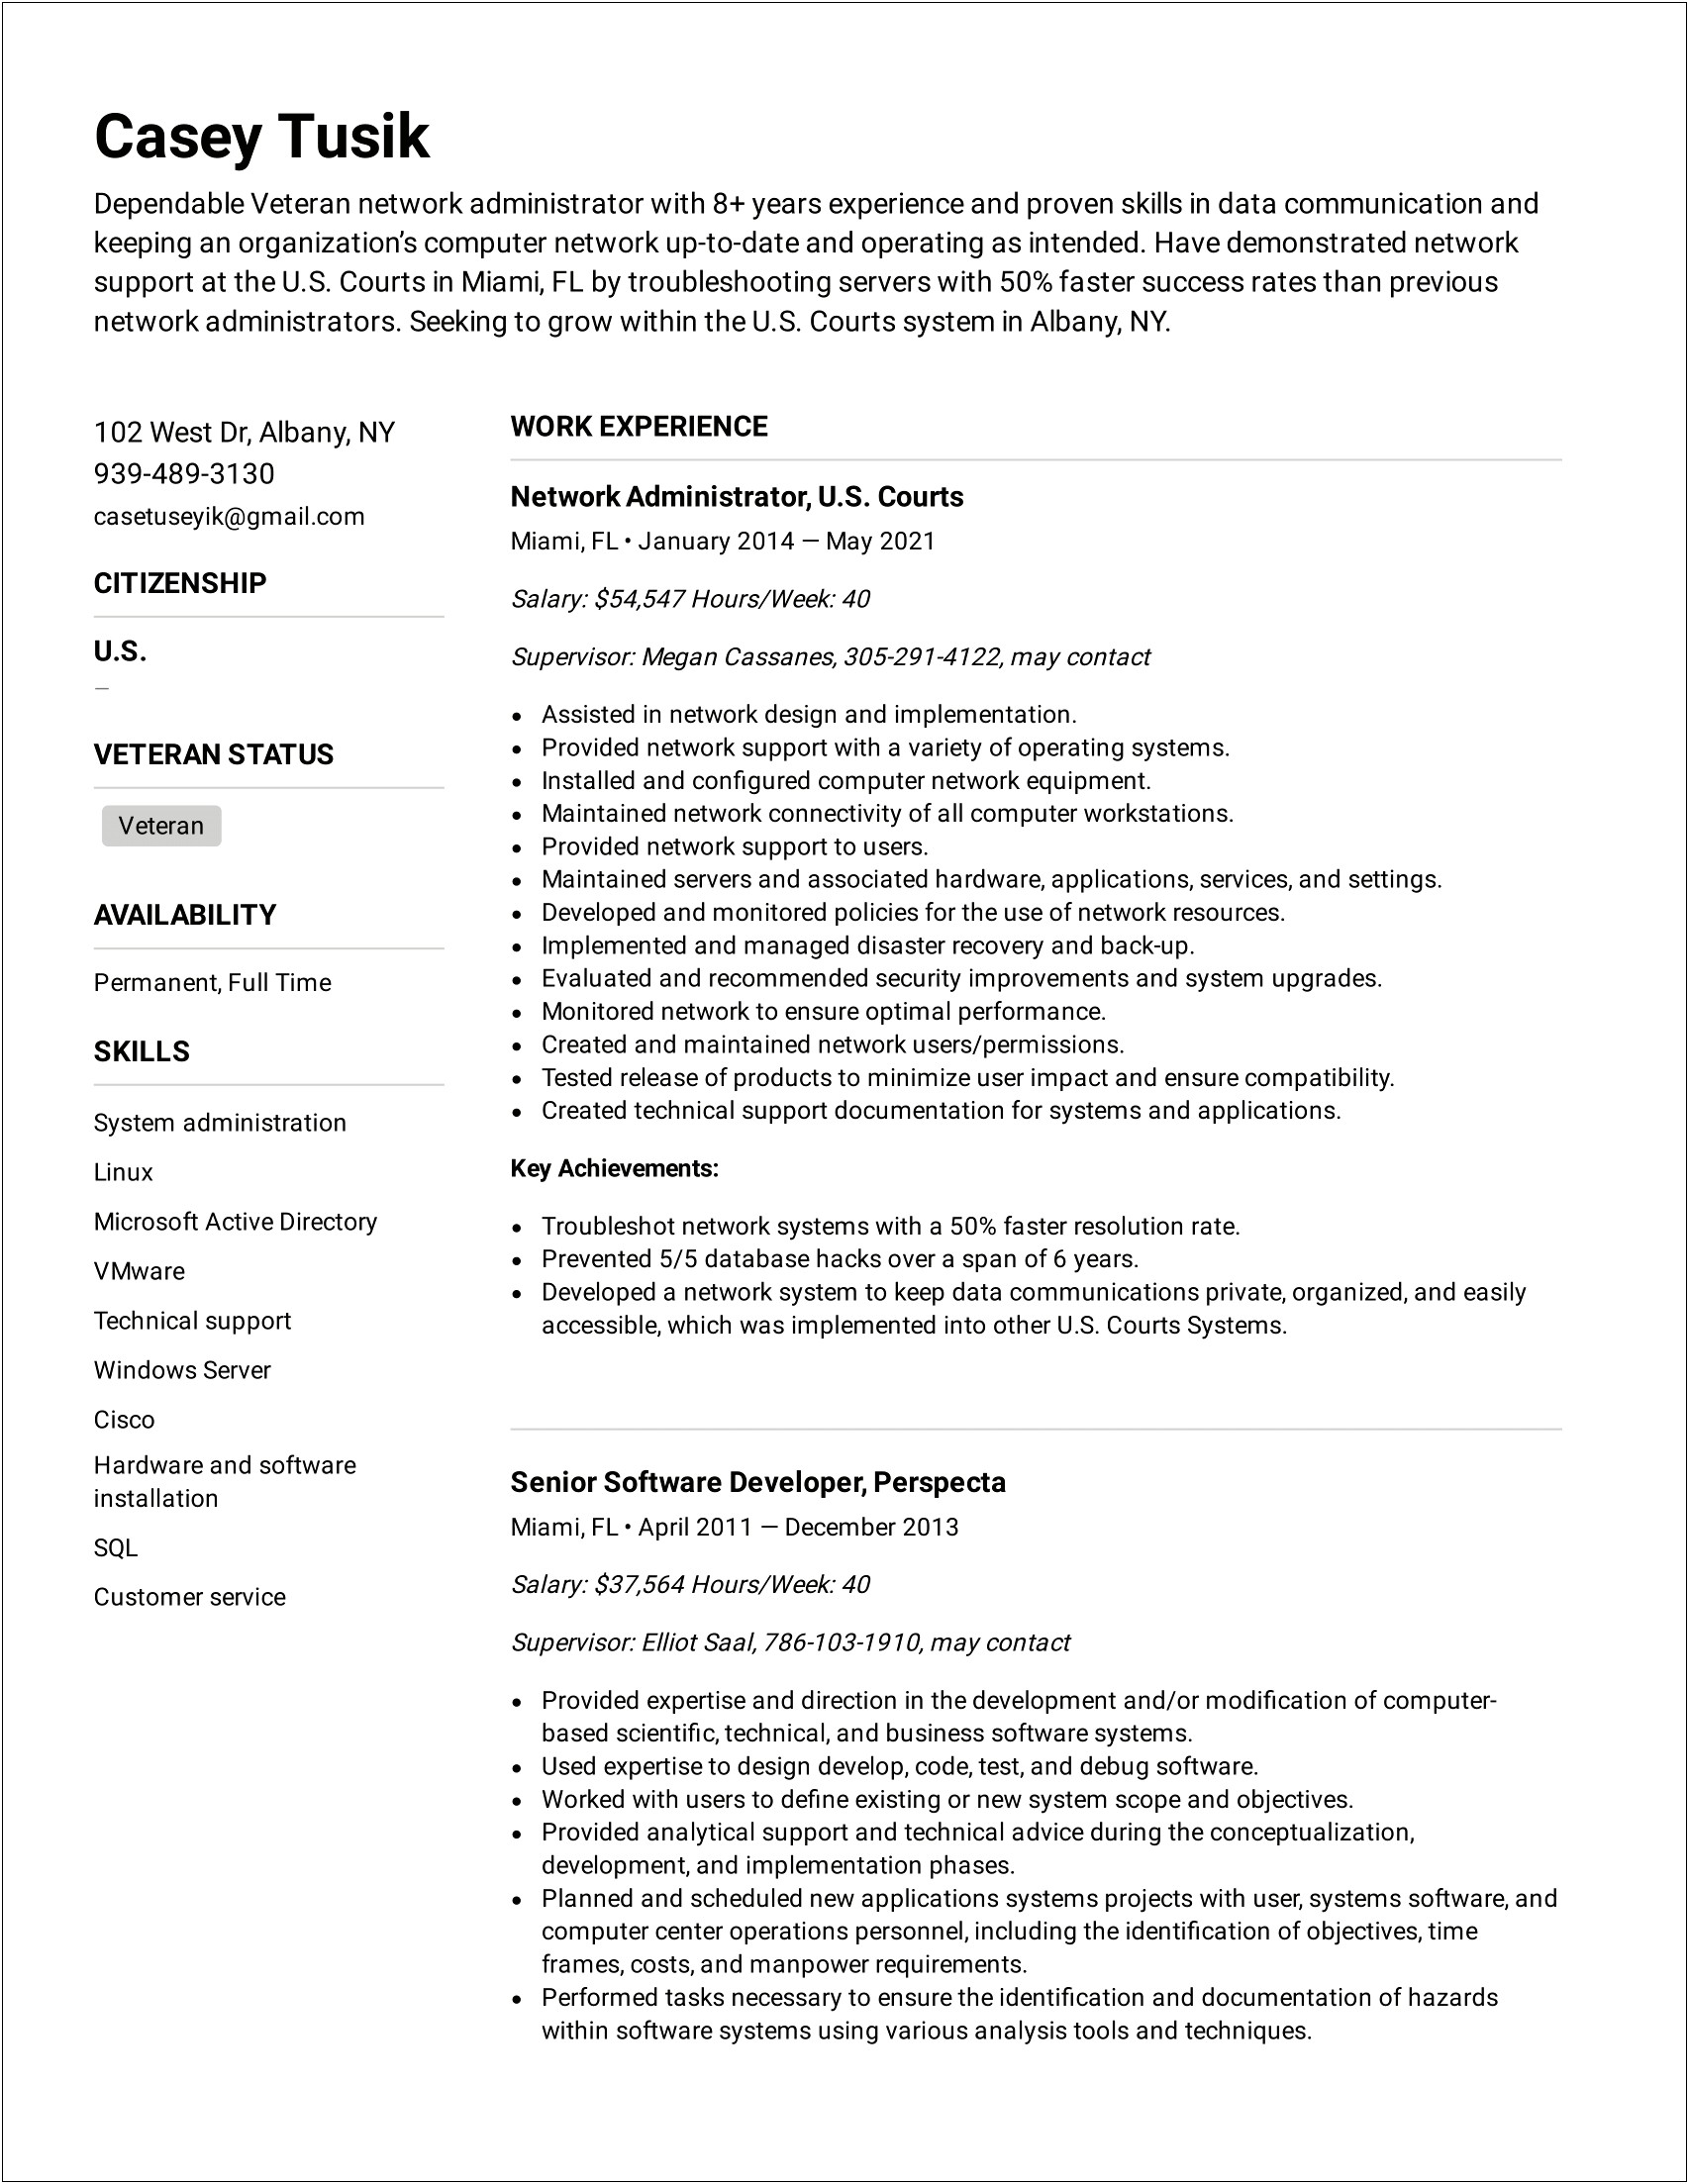 Linux Admin 6 Years Experience Resume